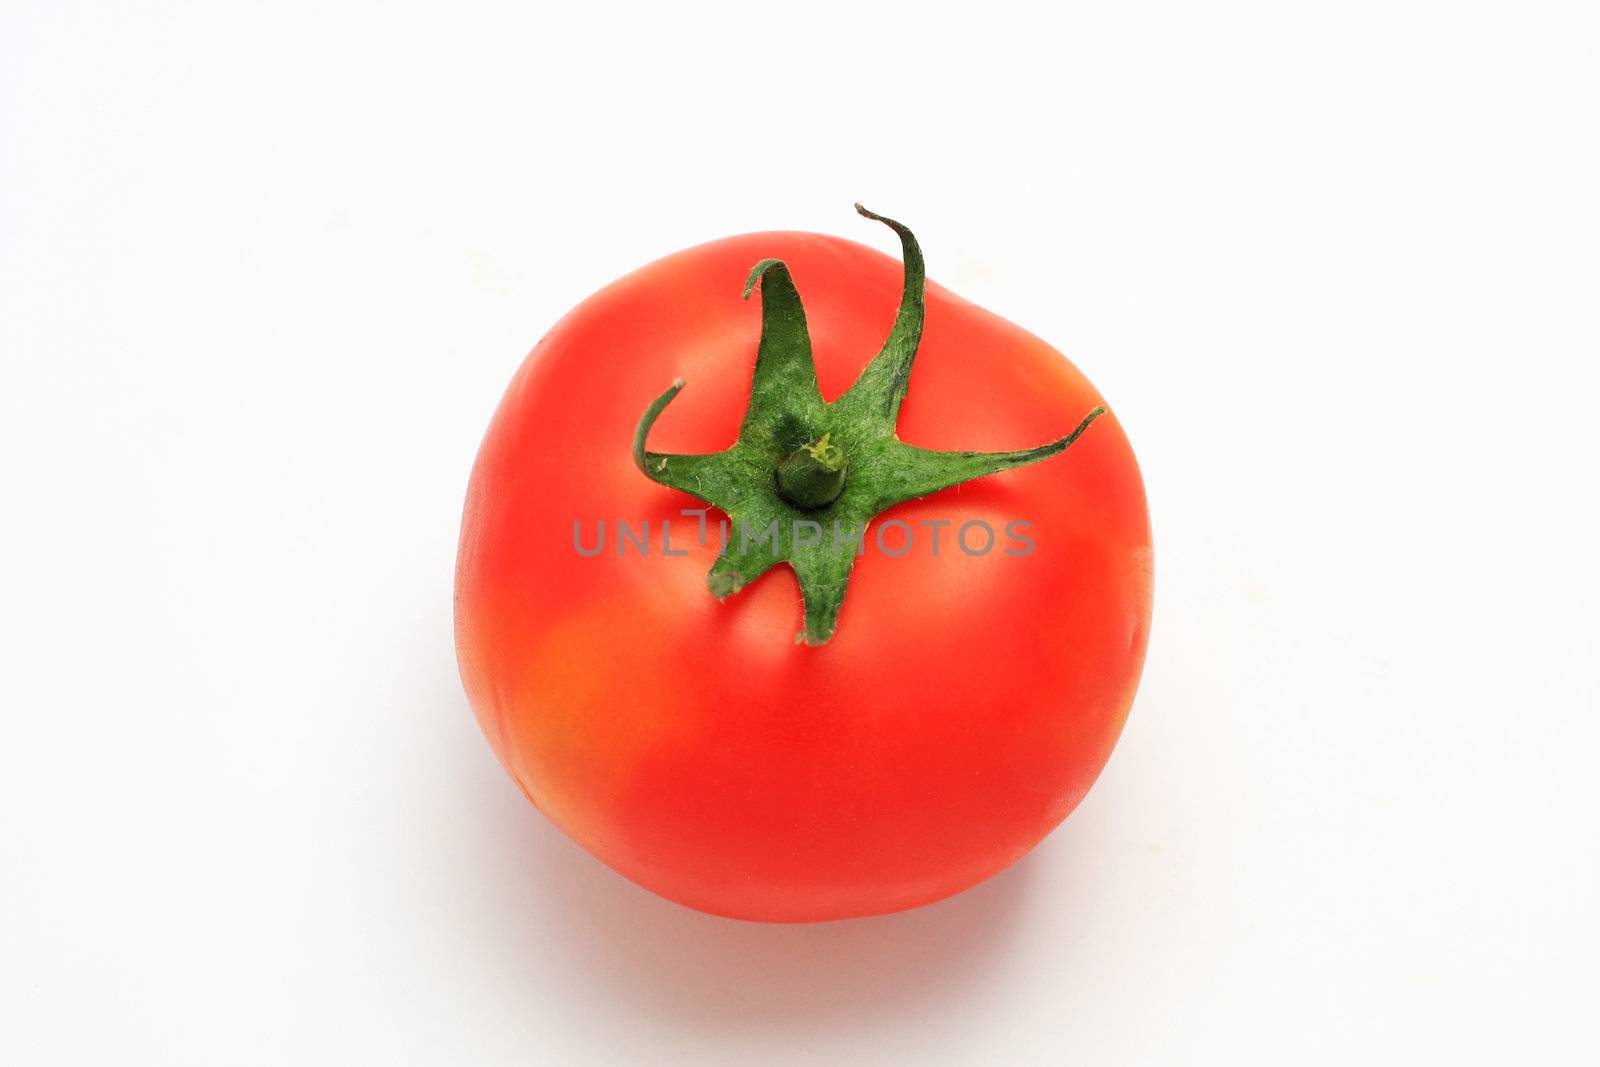 Red tomato shot from above, isolated on white, studio lighting